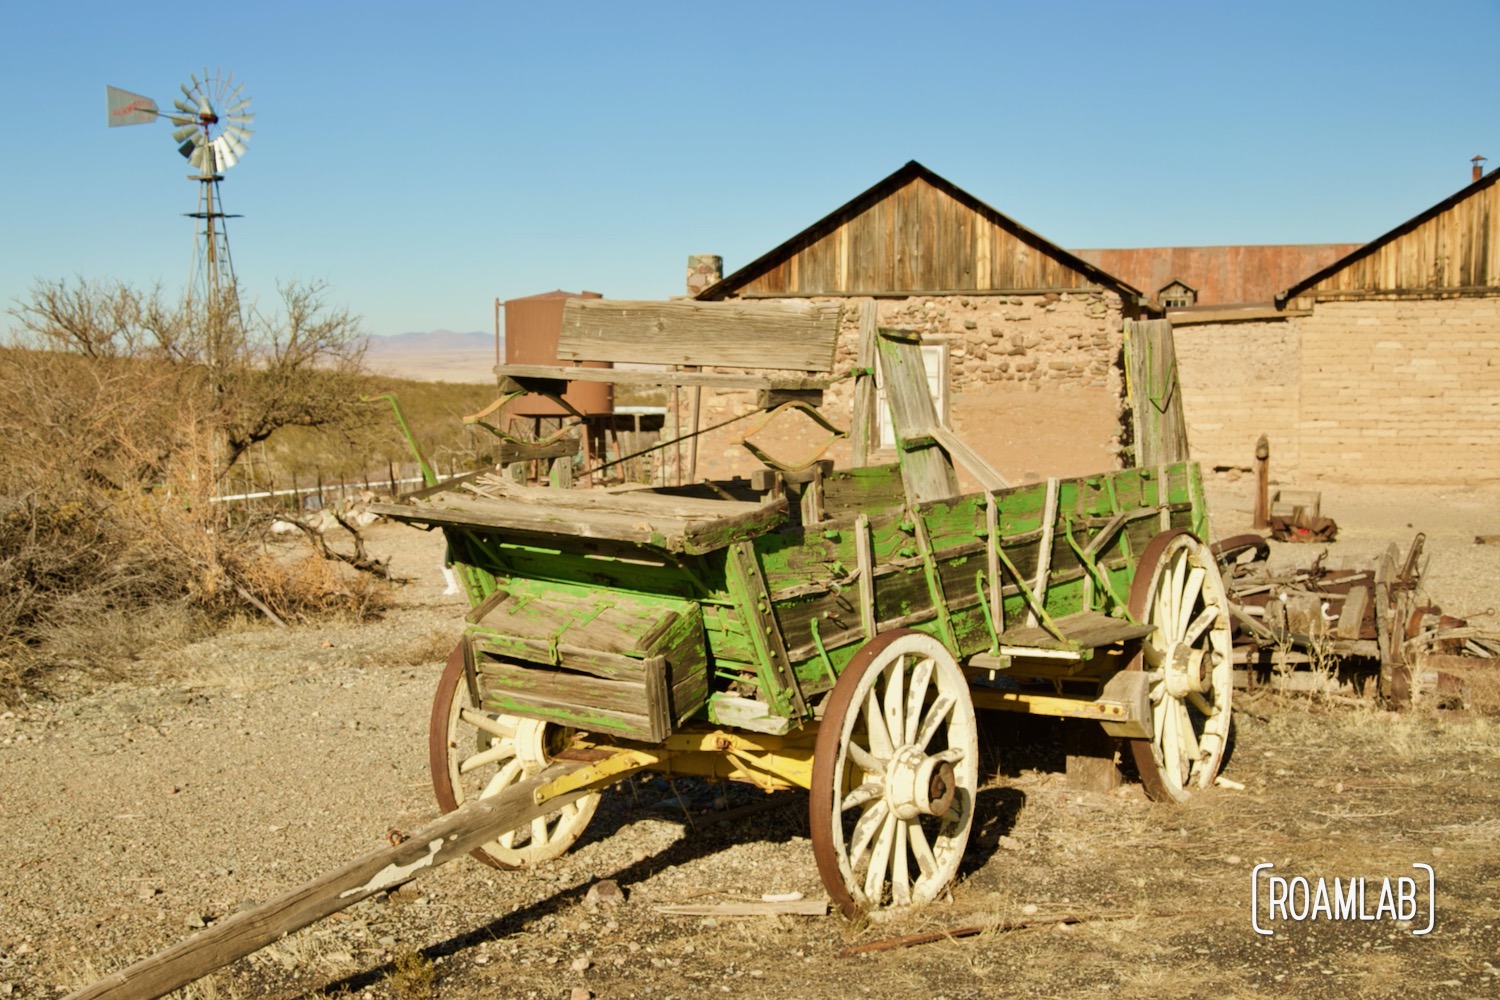 Green wagon in front of an aging adobe and wood structure with a windmill in the background in Shakespeare Ghost Town, New Mexico.